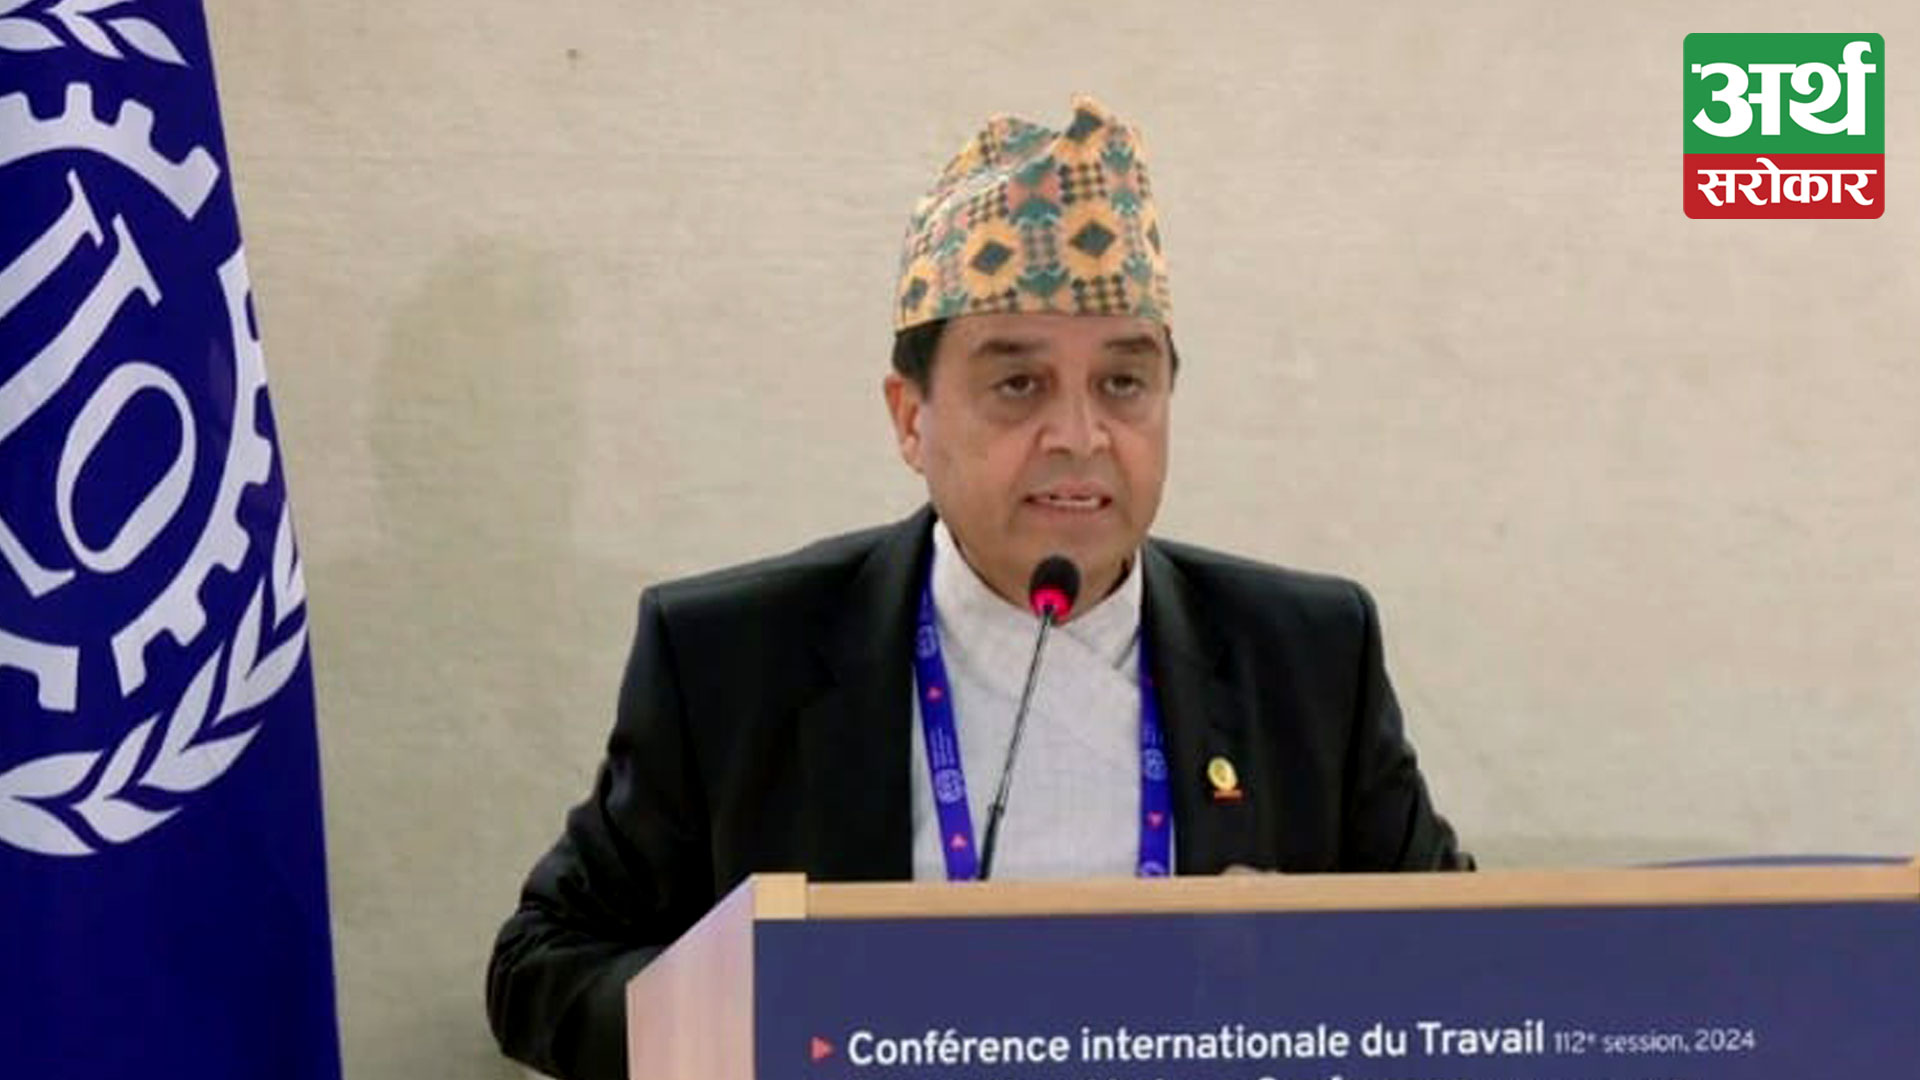 FNCCI President Dhakal addresses the 112th International Labour Conference